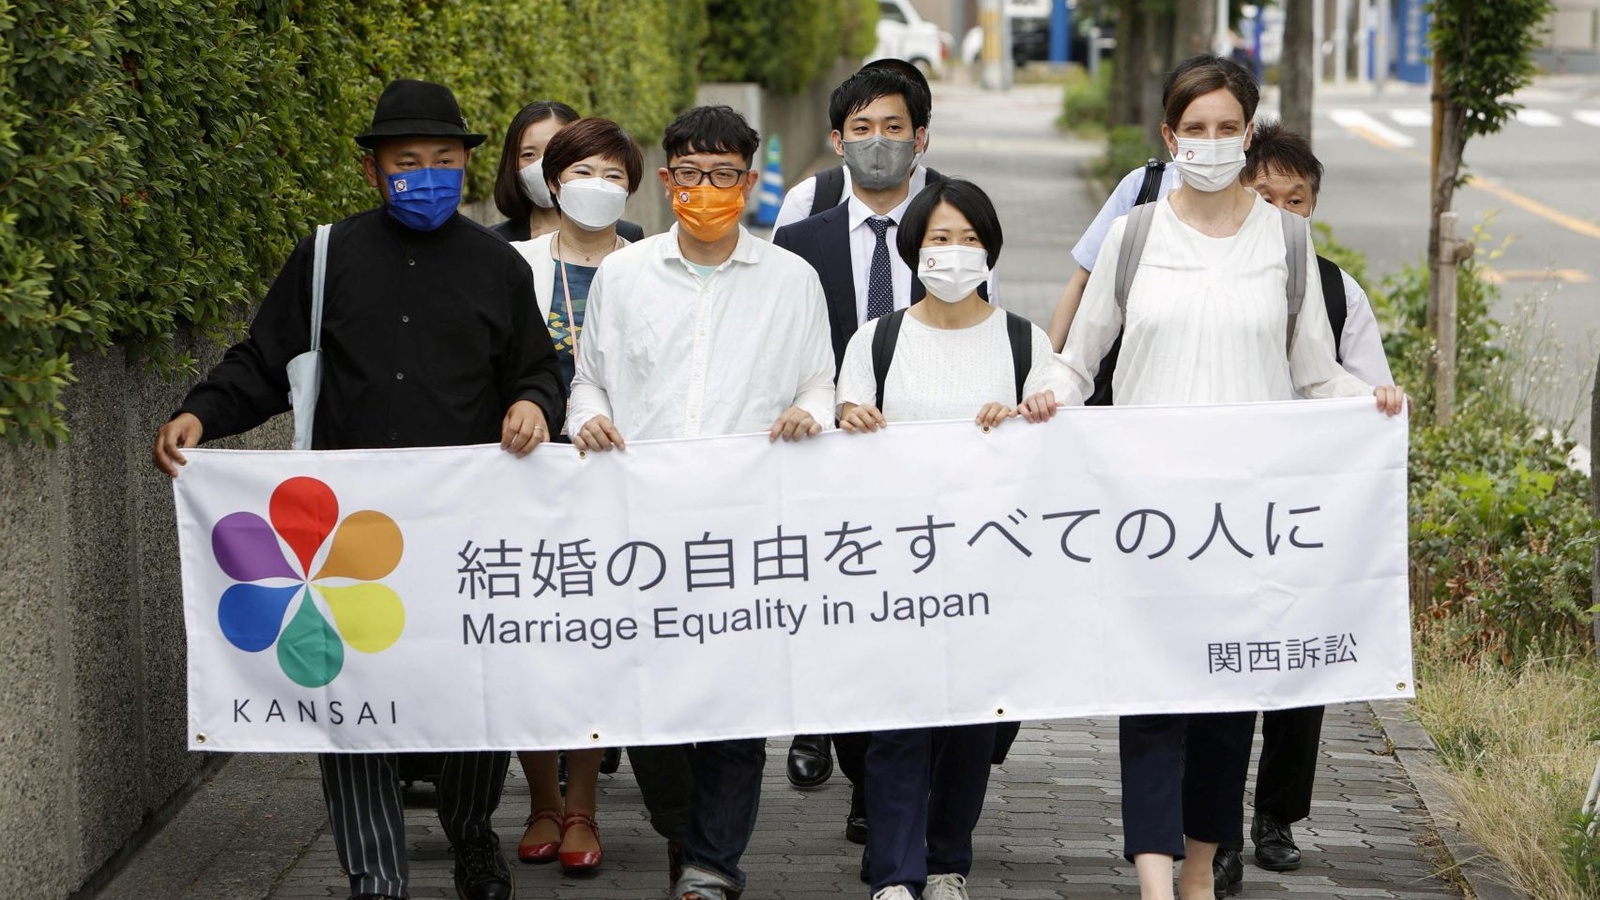 Mixed Messages From Japanese Courts on Same-Sex Marriage Council on Foreign Relations photo